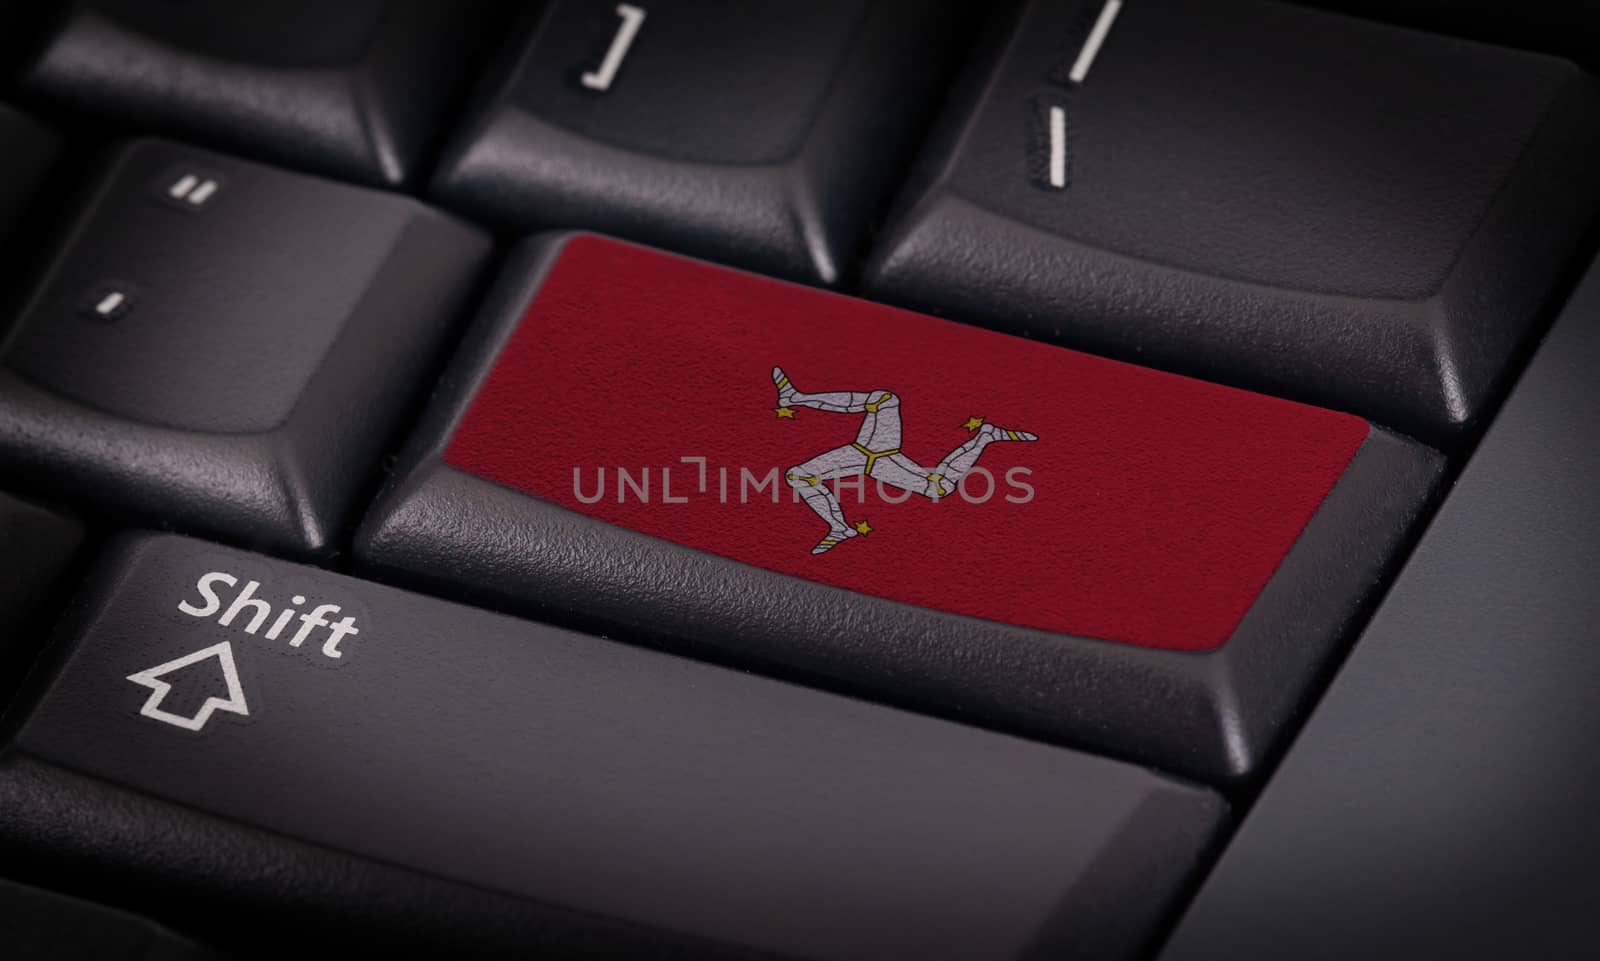 Flag on keyboard by michaklootwijk